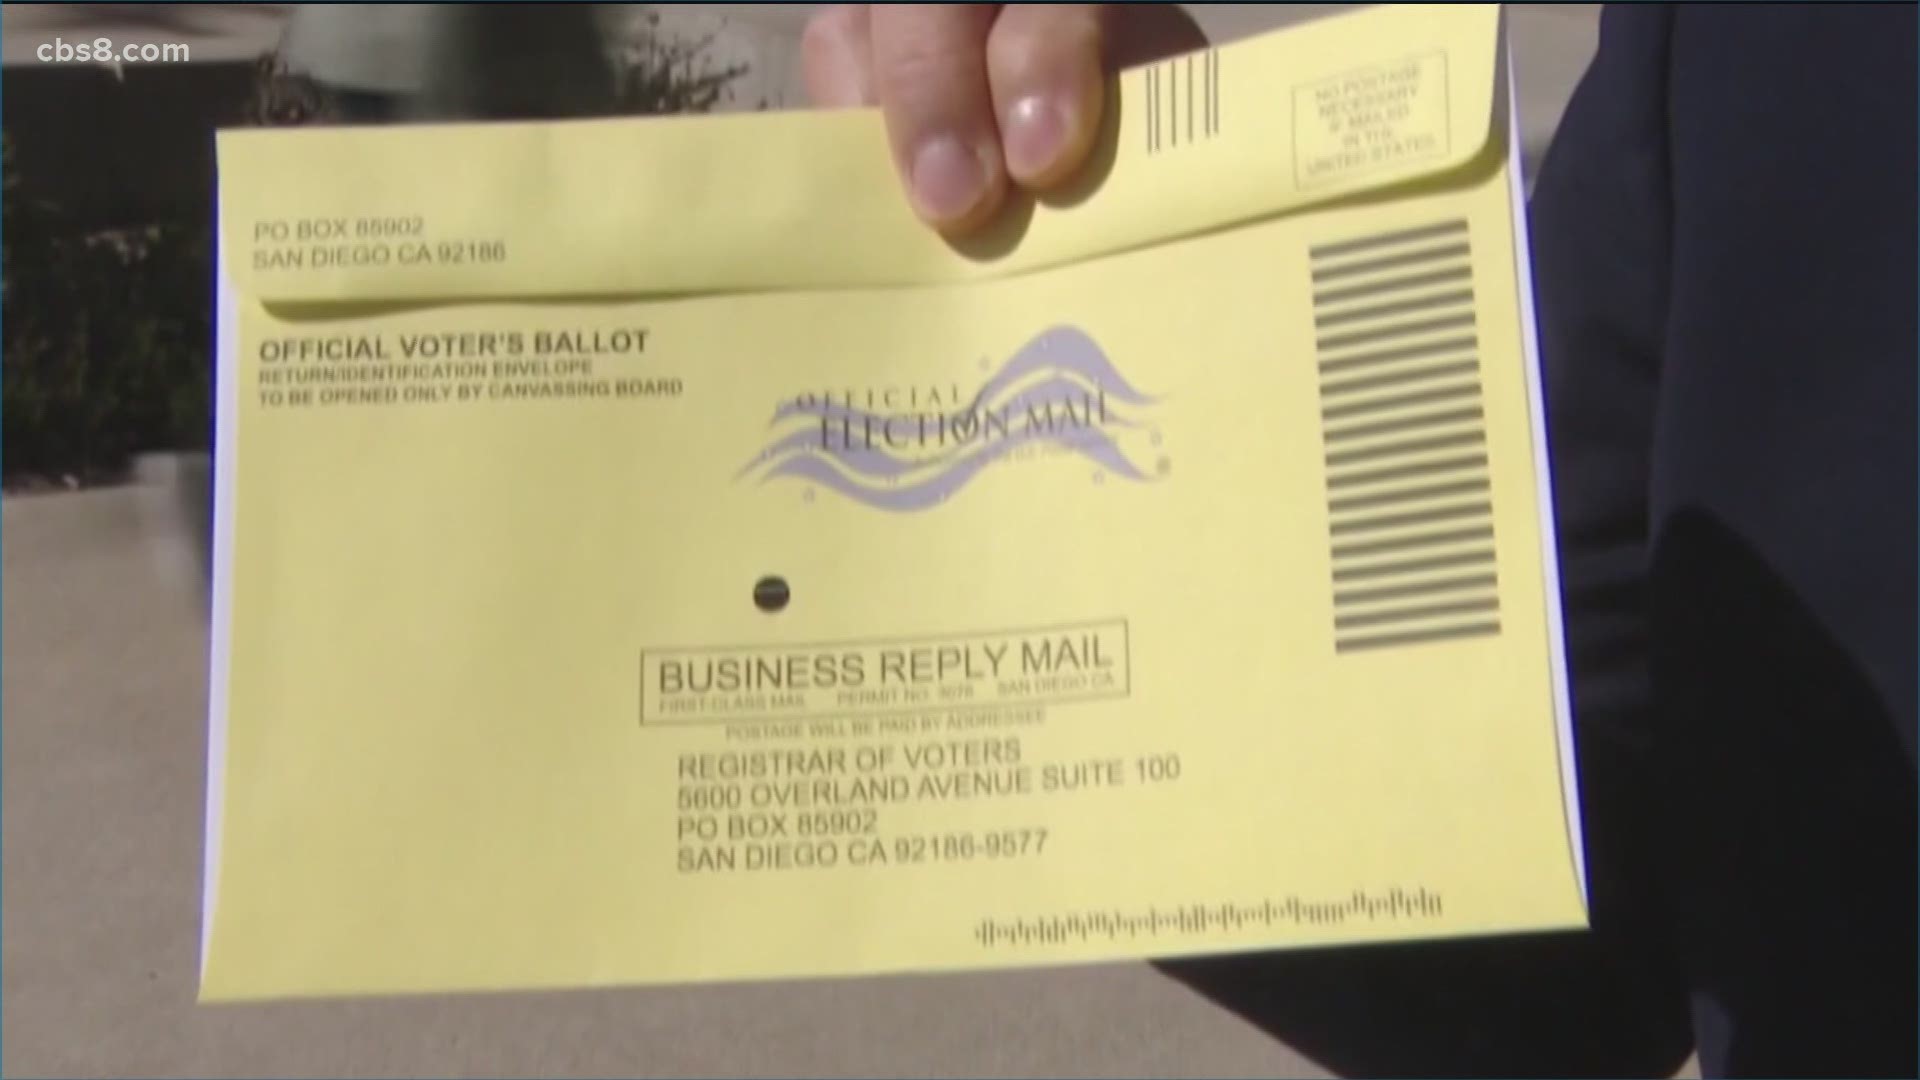 News 8 took viewer emails directly to the San Diego Registrar of Voters to get answers.